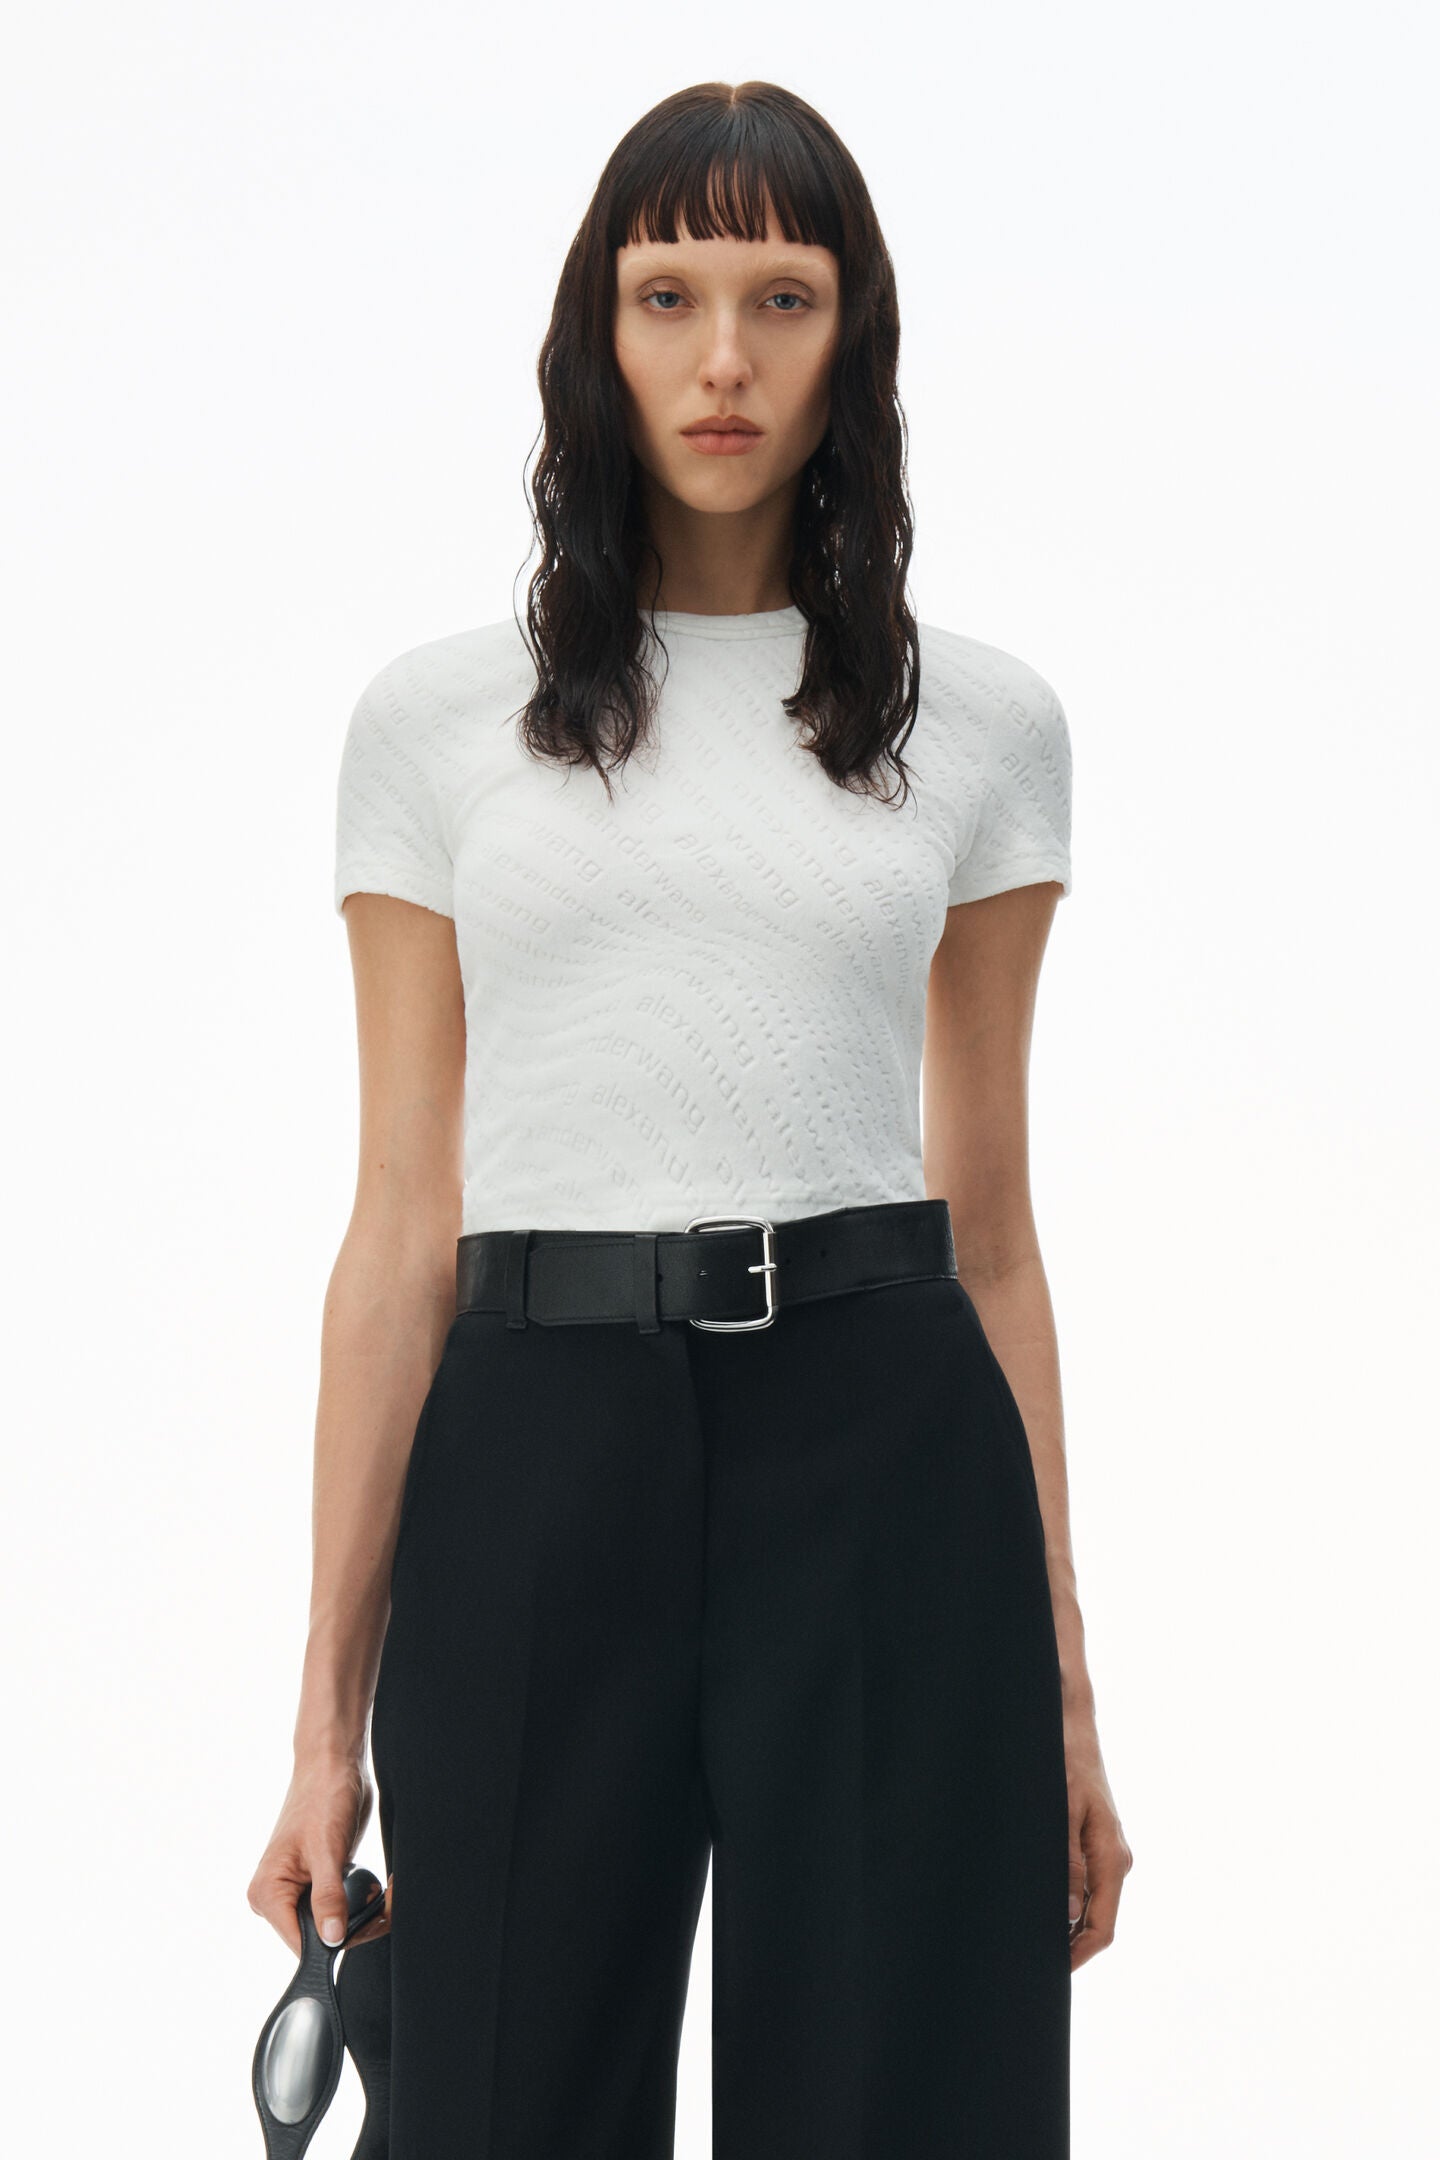 Alexander Wang Crew Neck Short Sleeve Baby Tee in White available at The New Trend Australia